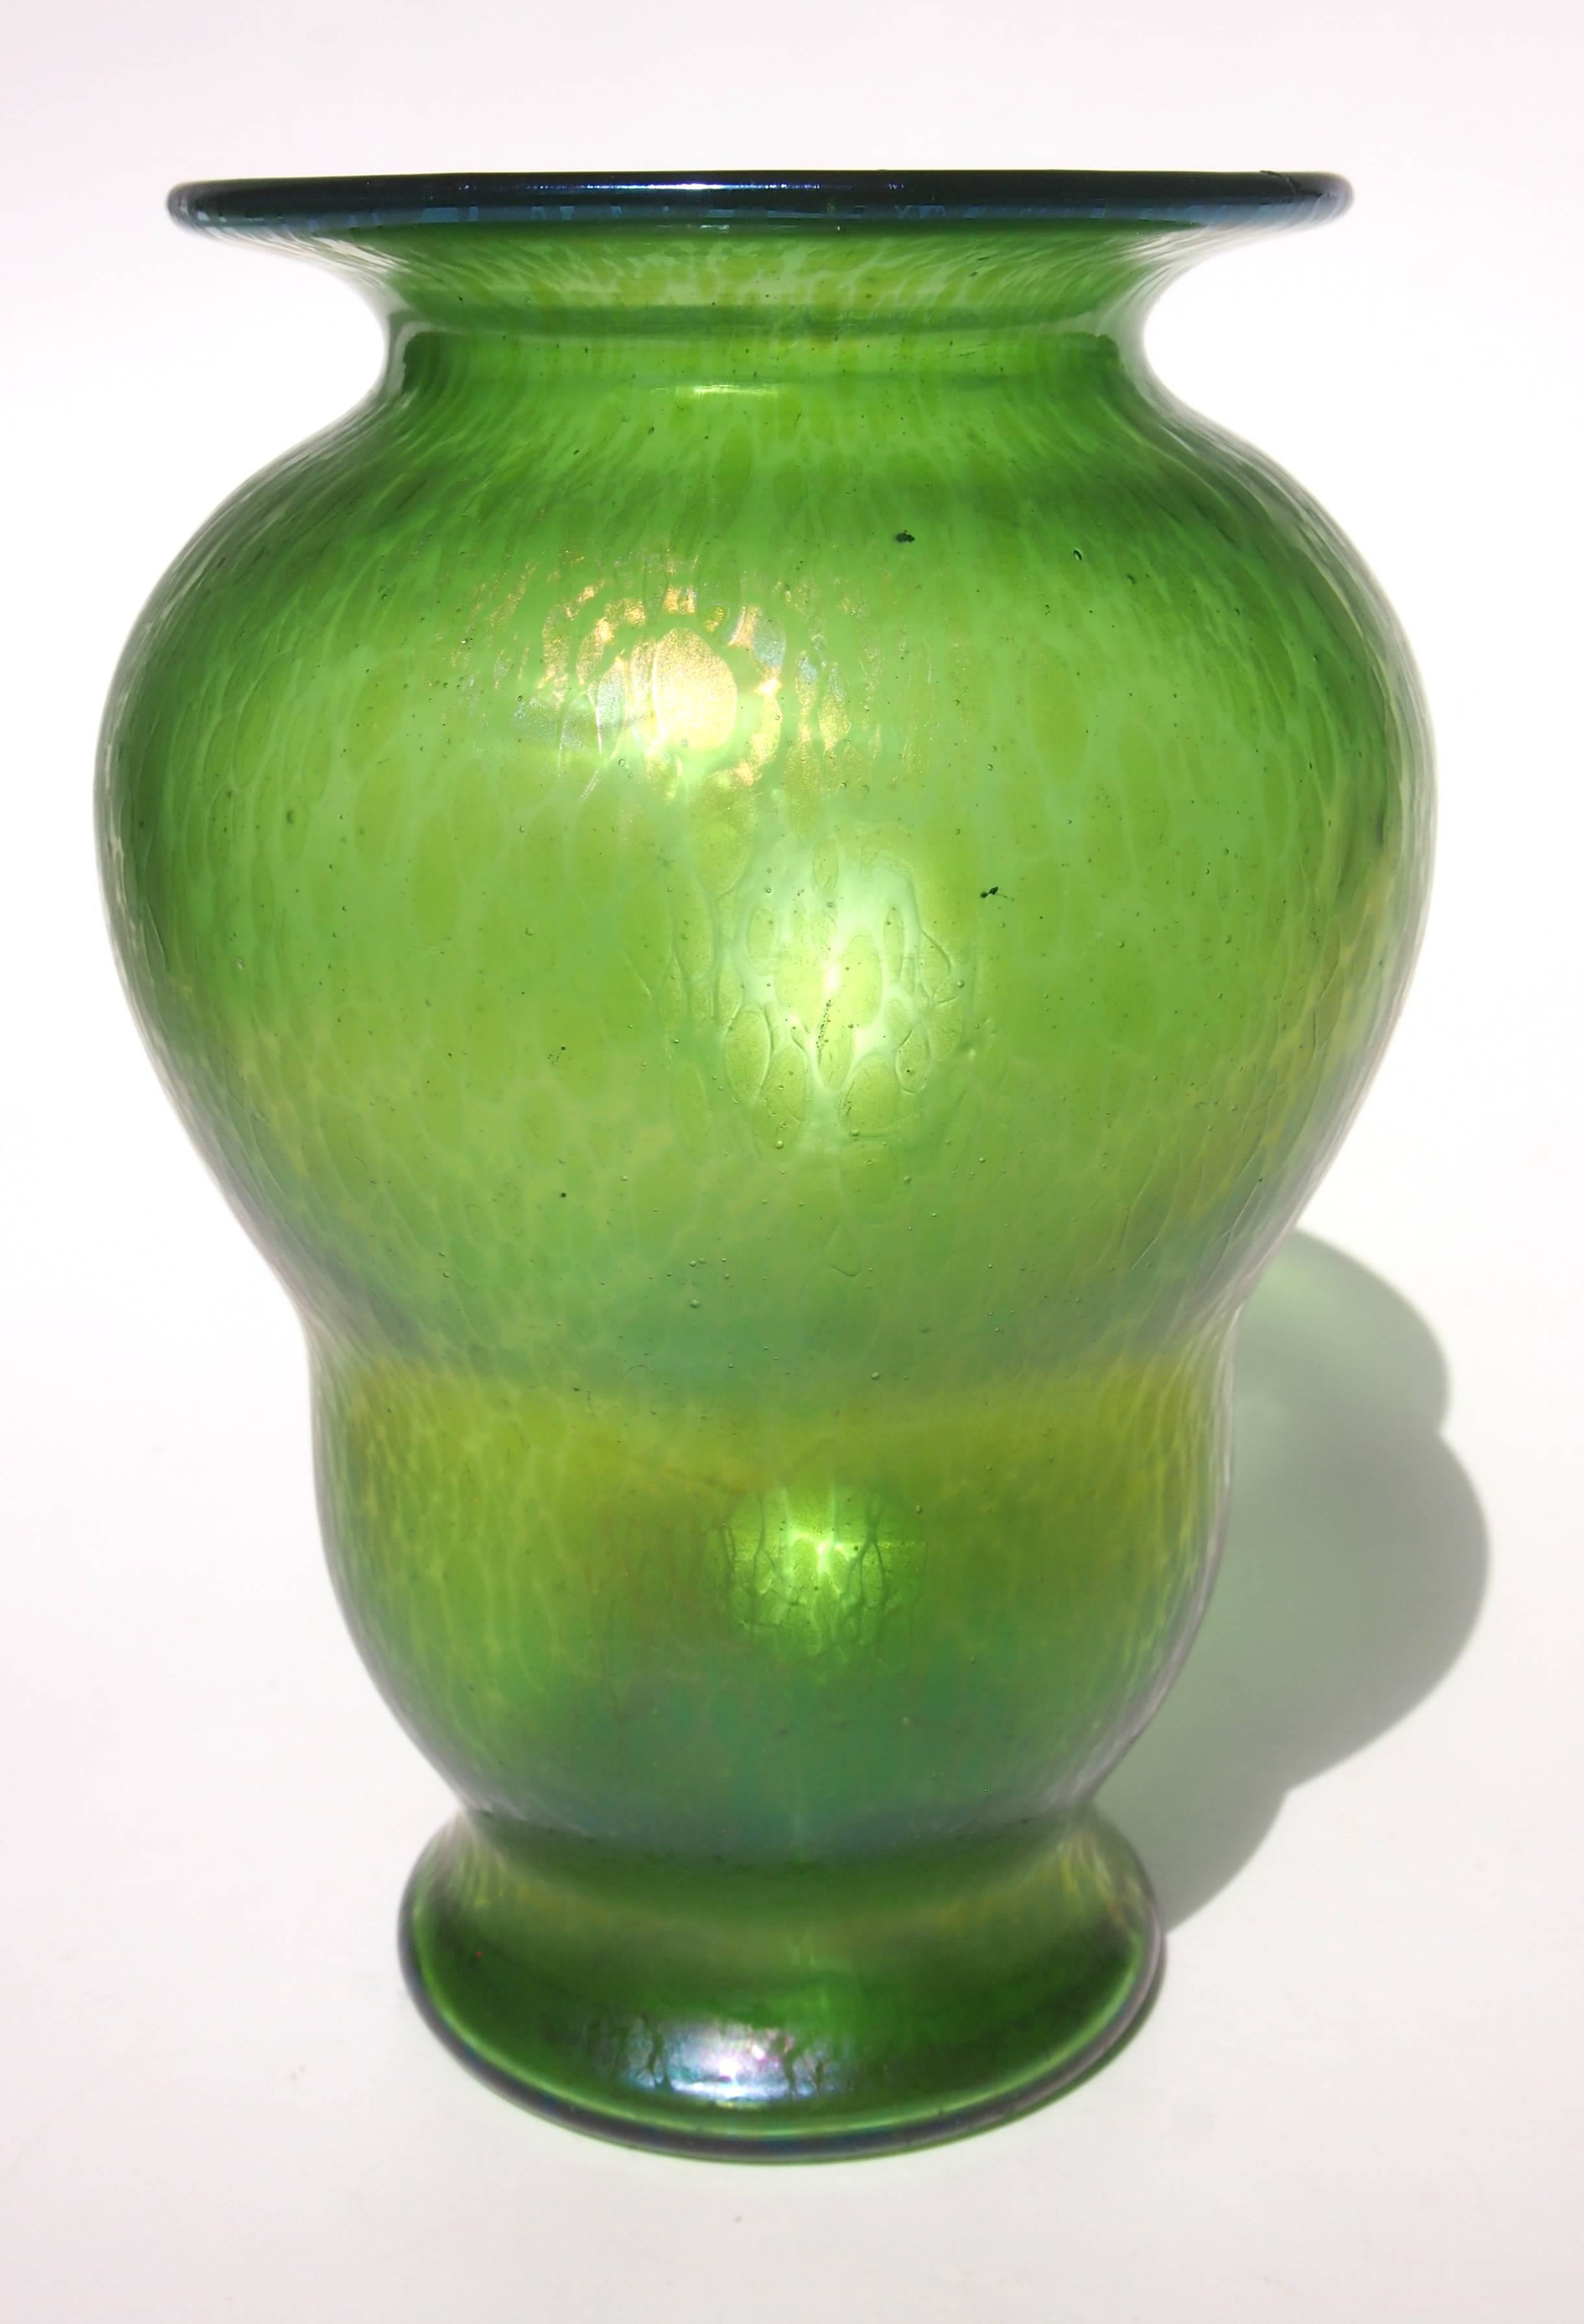 Stunning Loetz Crete (green) Ciselé vase in a great shape - Ciselé was one of Loetz's earliest iridised finishes similar to Papillon but subtly different.